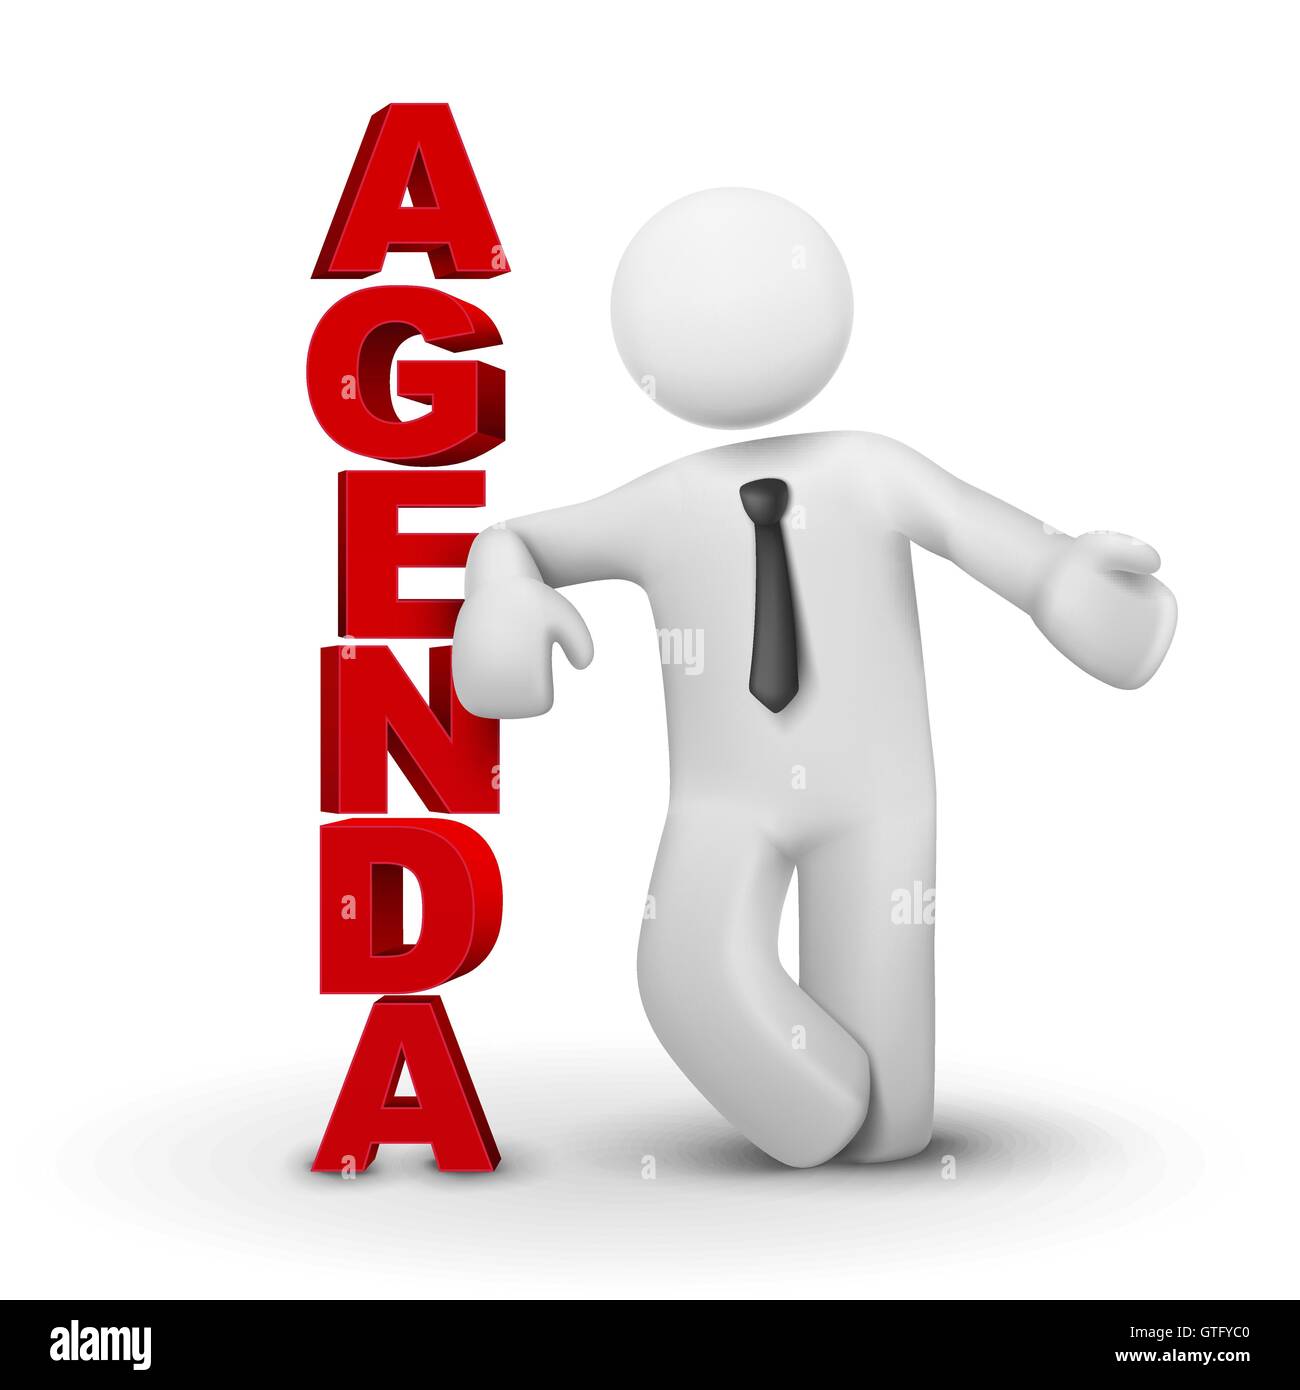 https://c8.alamy.com/comp/GTFYC0/3d-business-man-presenting-concept-of-agenda-isolated-white-background-GTFYC0.jpg